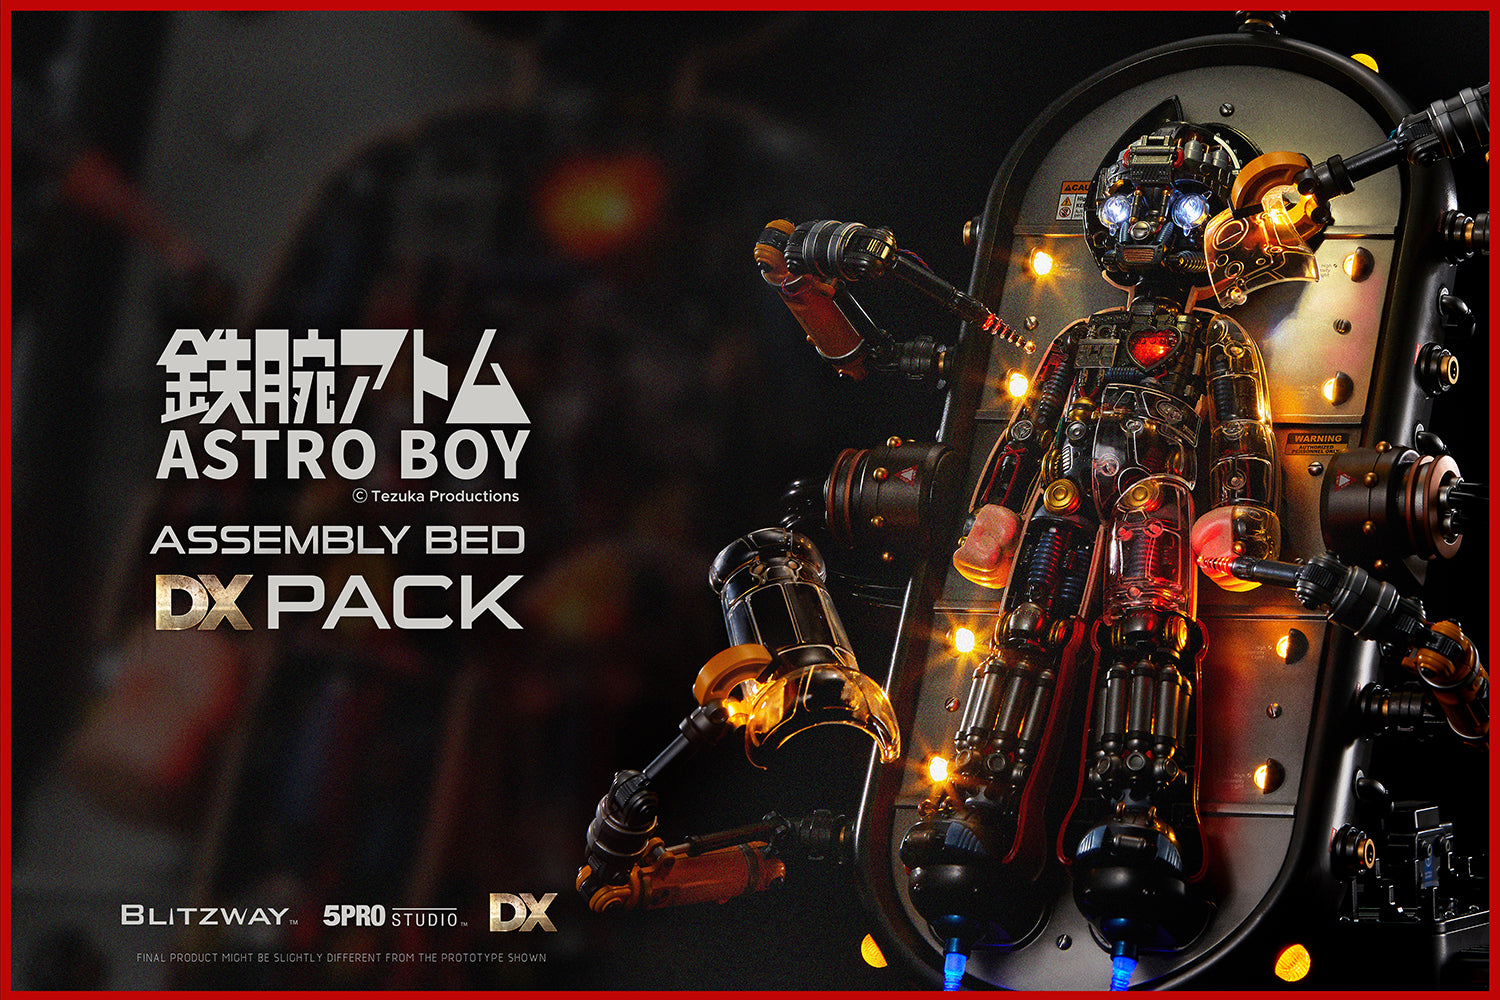 5Pro Studio - The Real Series - Astro Boy (Clear Ver. with Assembly Bed DX Pack) - Marvelous Toys